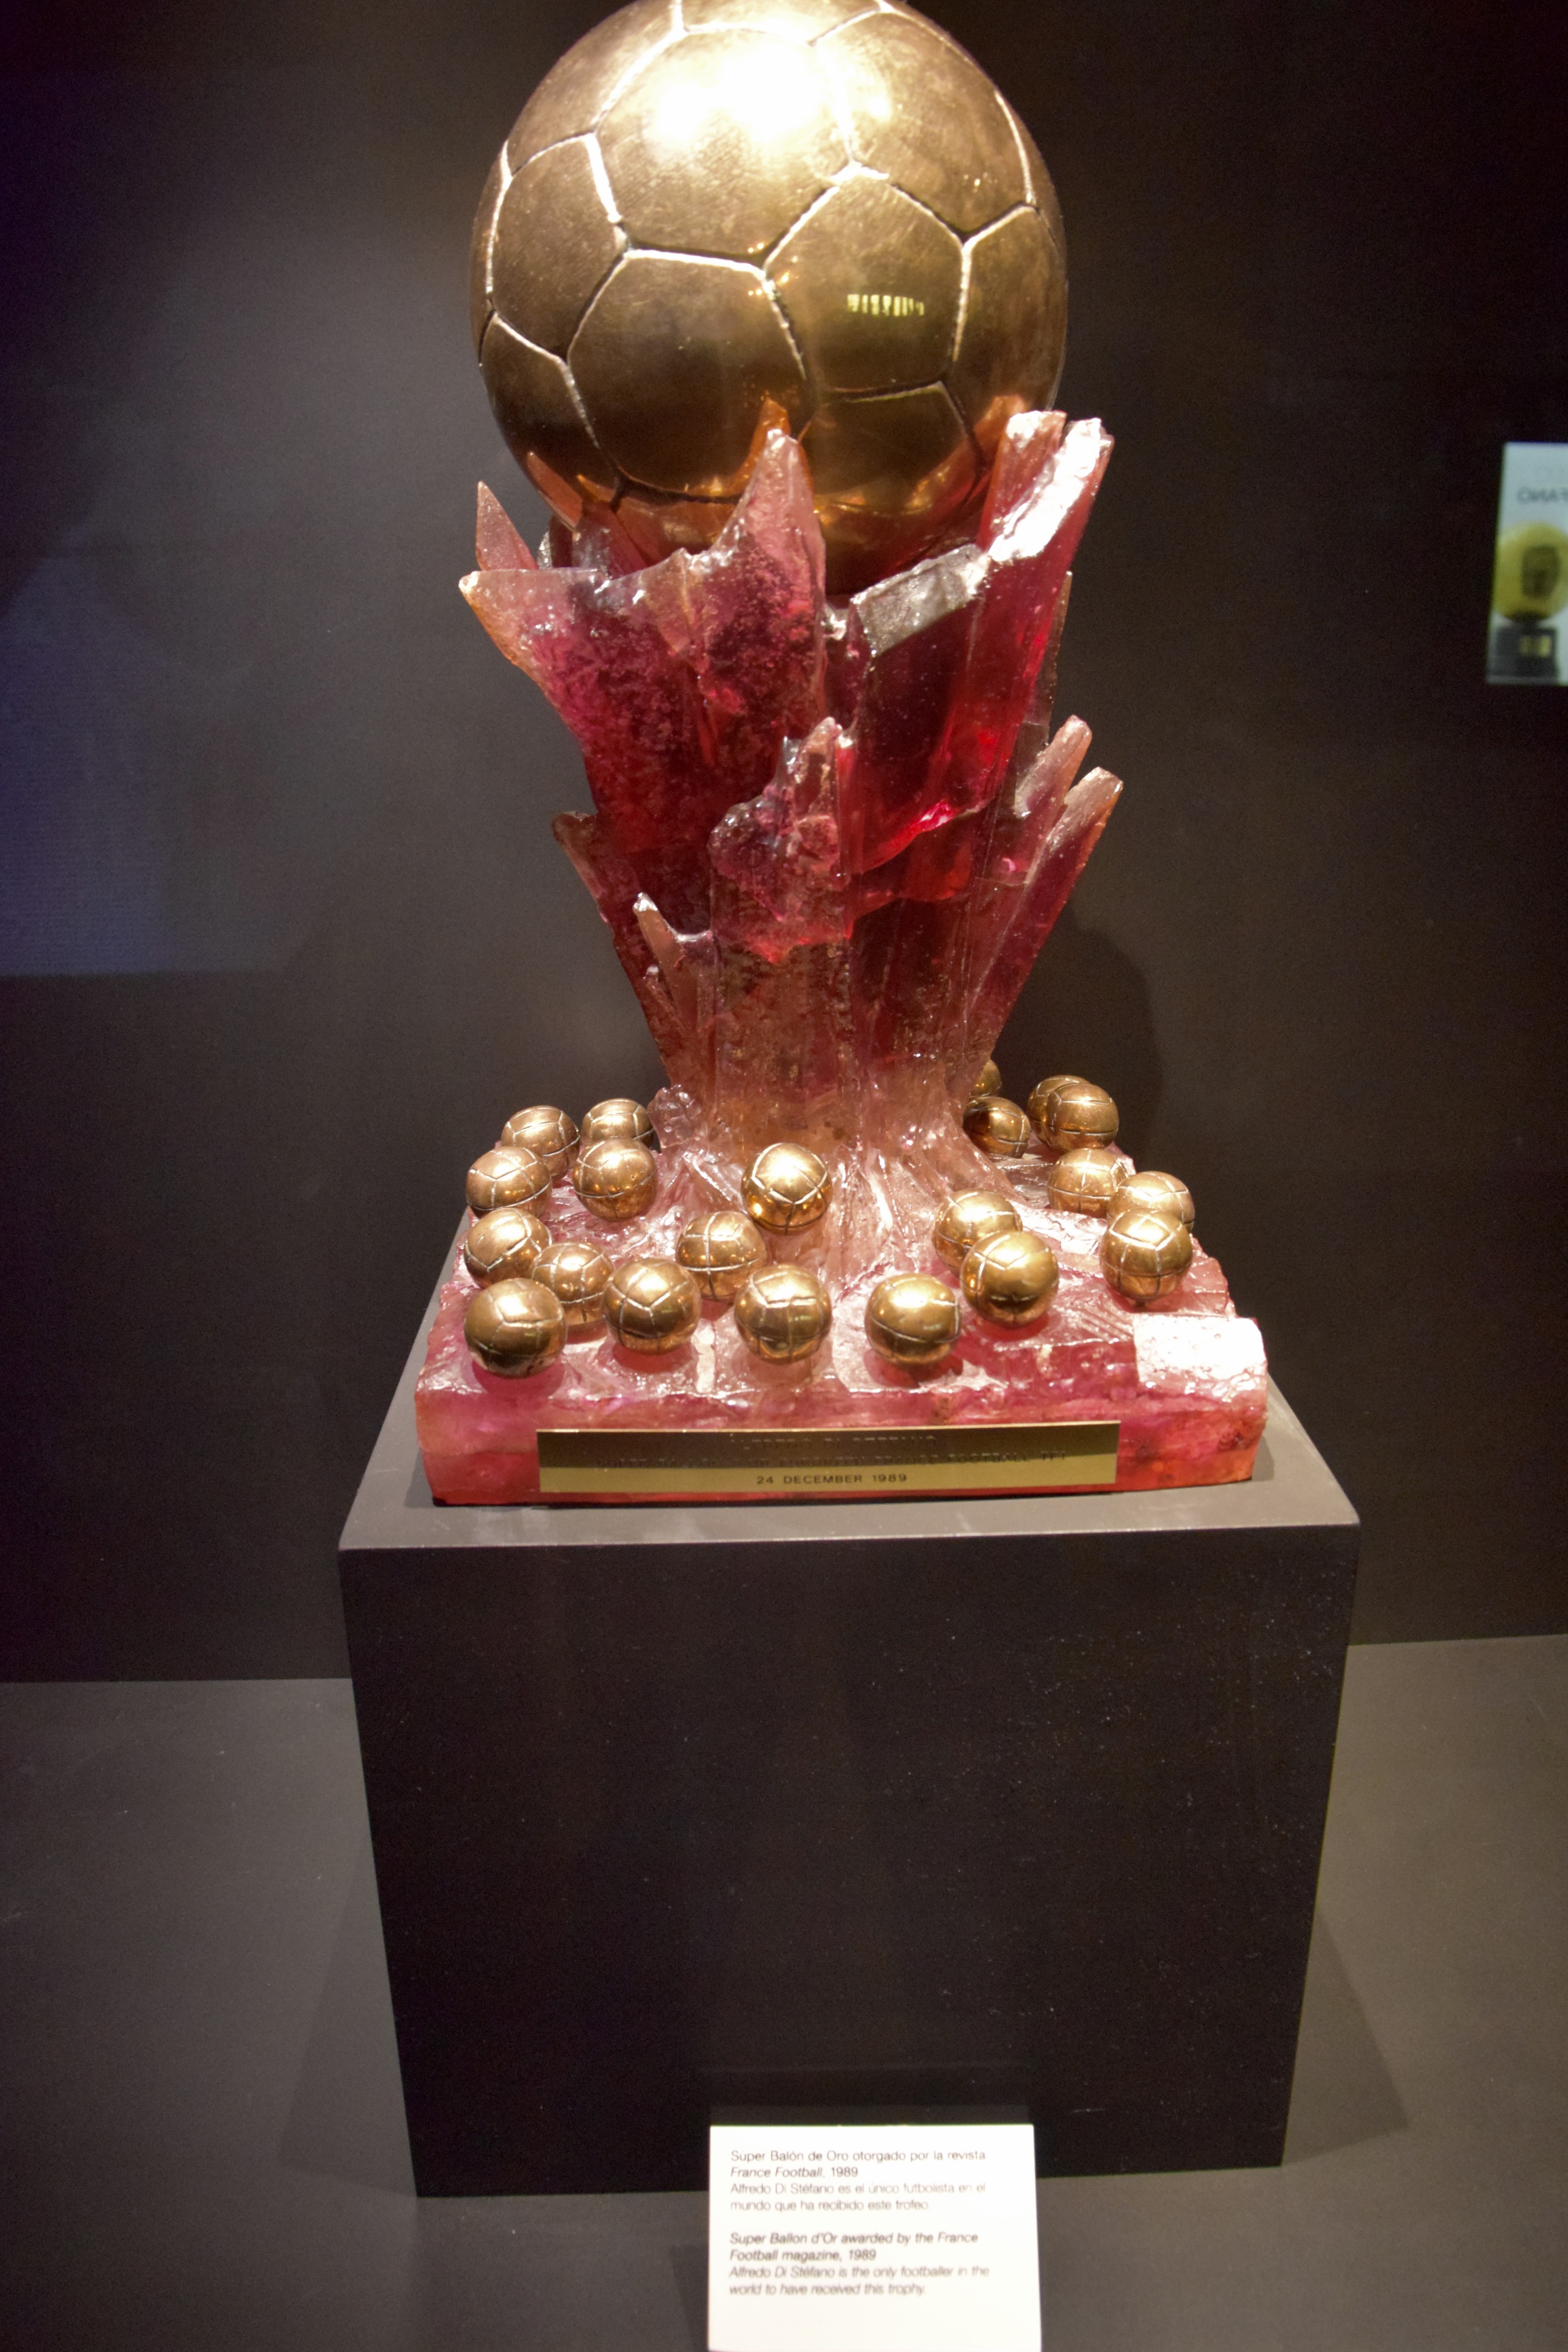 Mainstream Wizard decaan File:Alfredo Di Stéfano's Super Ballon d'Or trophy, Real Madrid Museum,  Madrid, Spain (Ank Kumar, Infosys Limited) 02.jpg - Wikimedia Commons